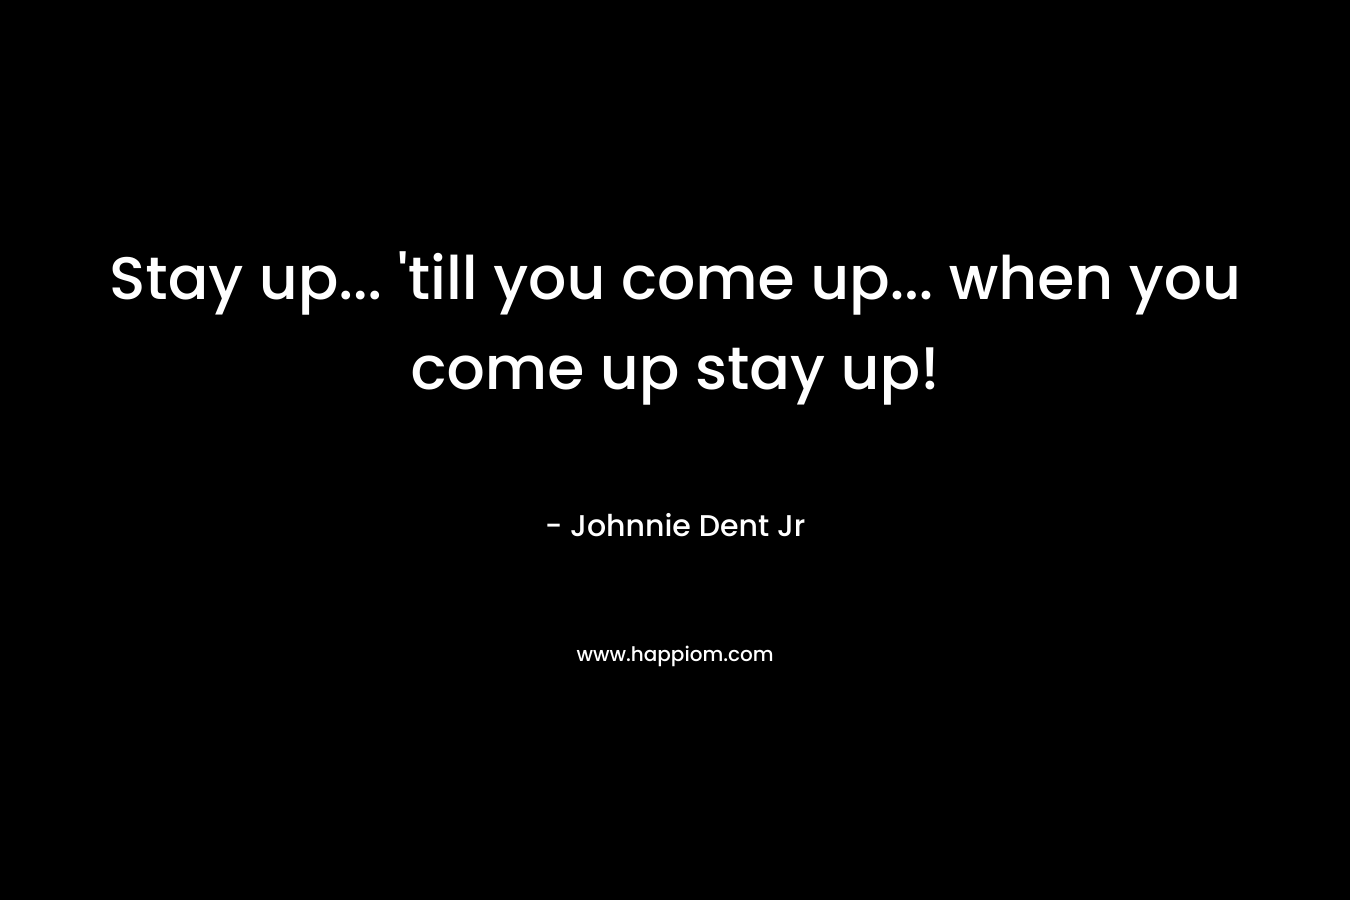 Stay up... 'till you come up... when you come up stay up!